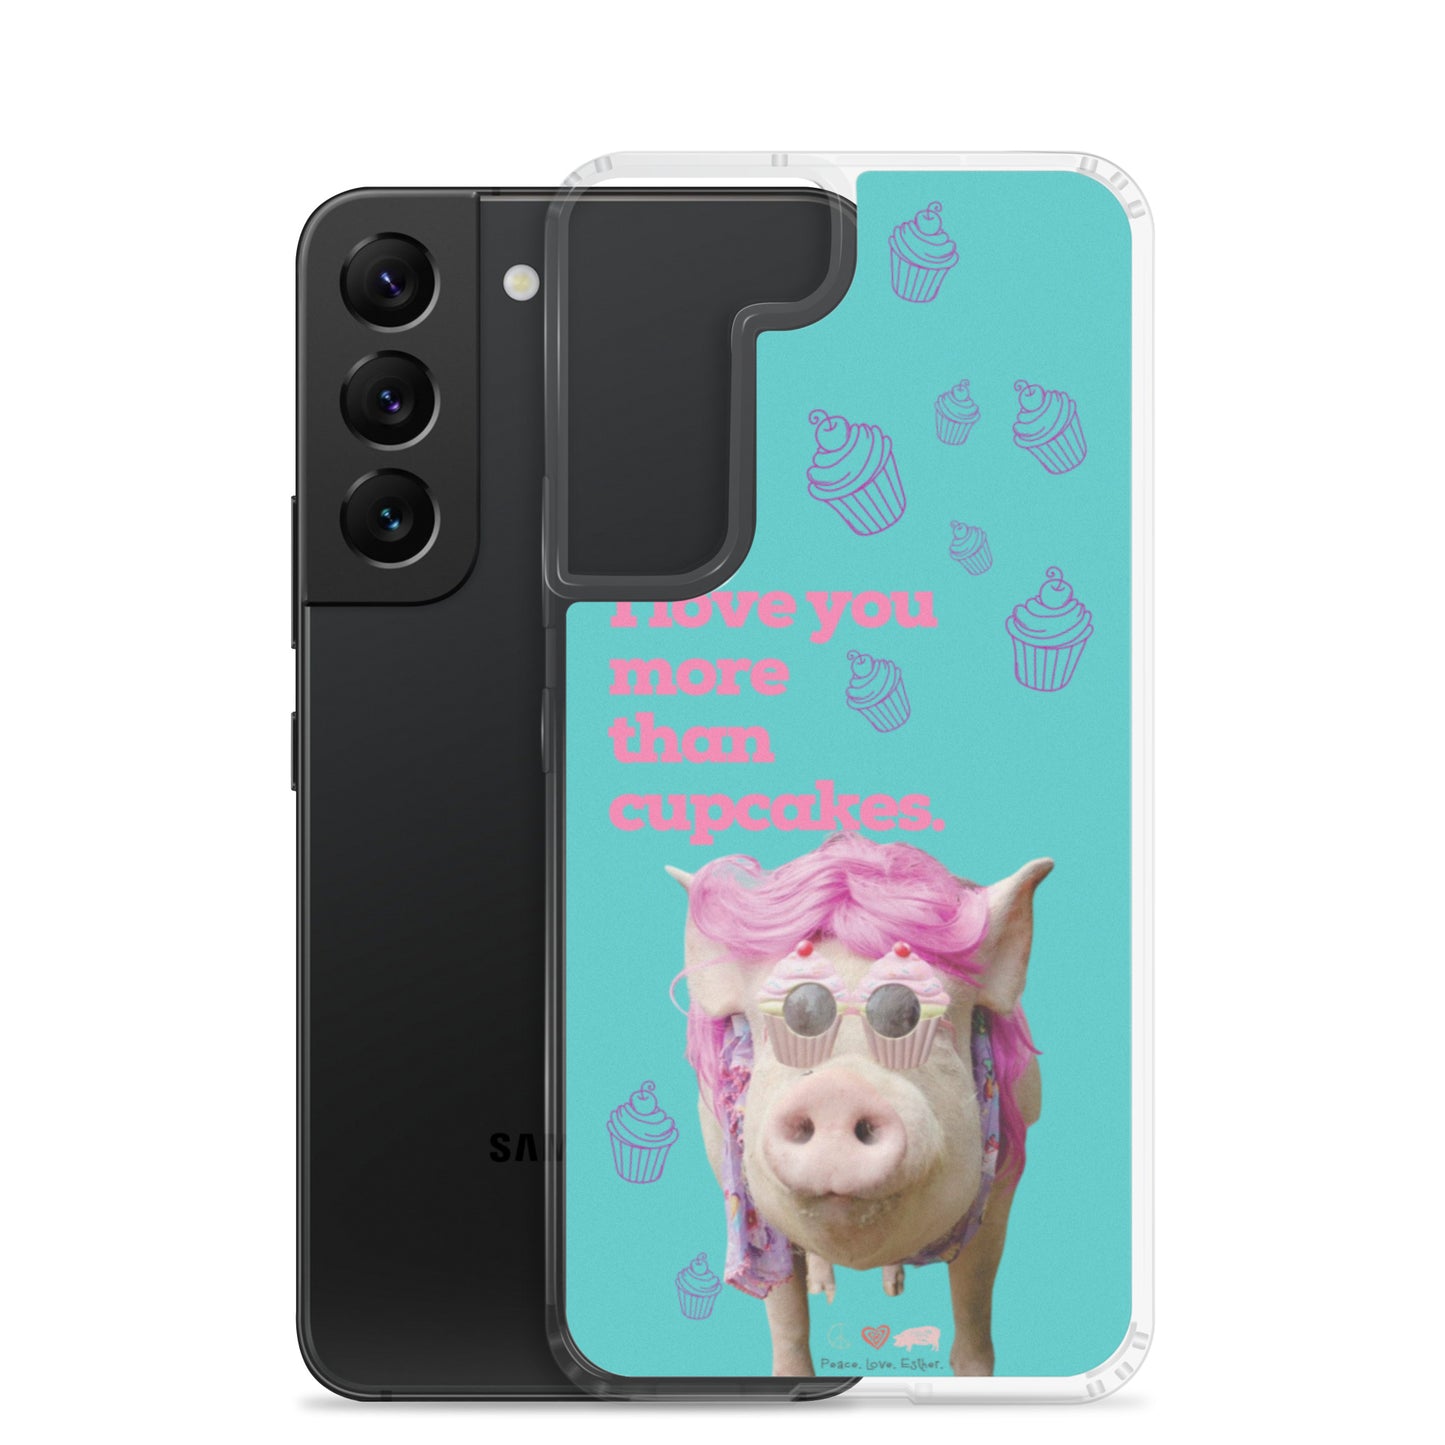 NEW- I love you more than Cupcakes! - Samsung Case